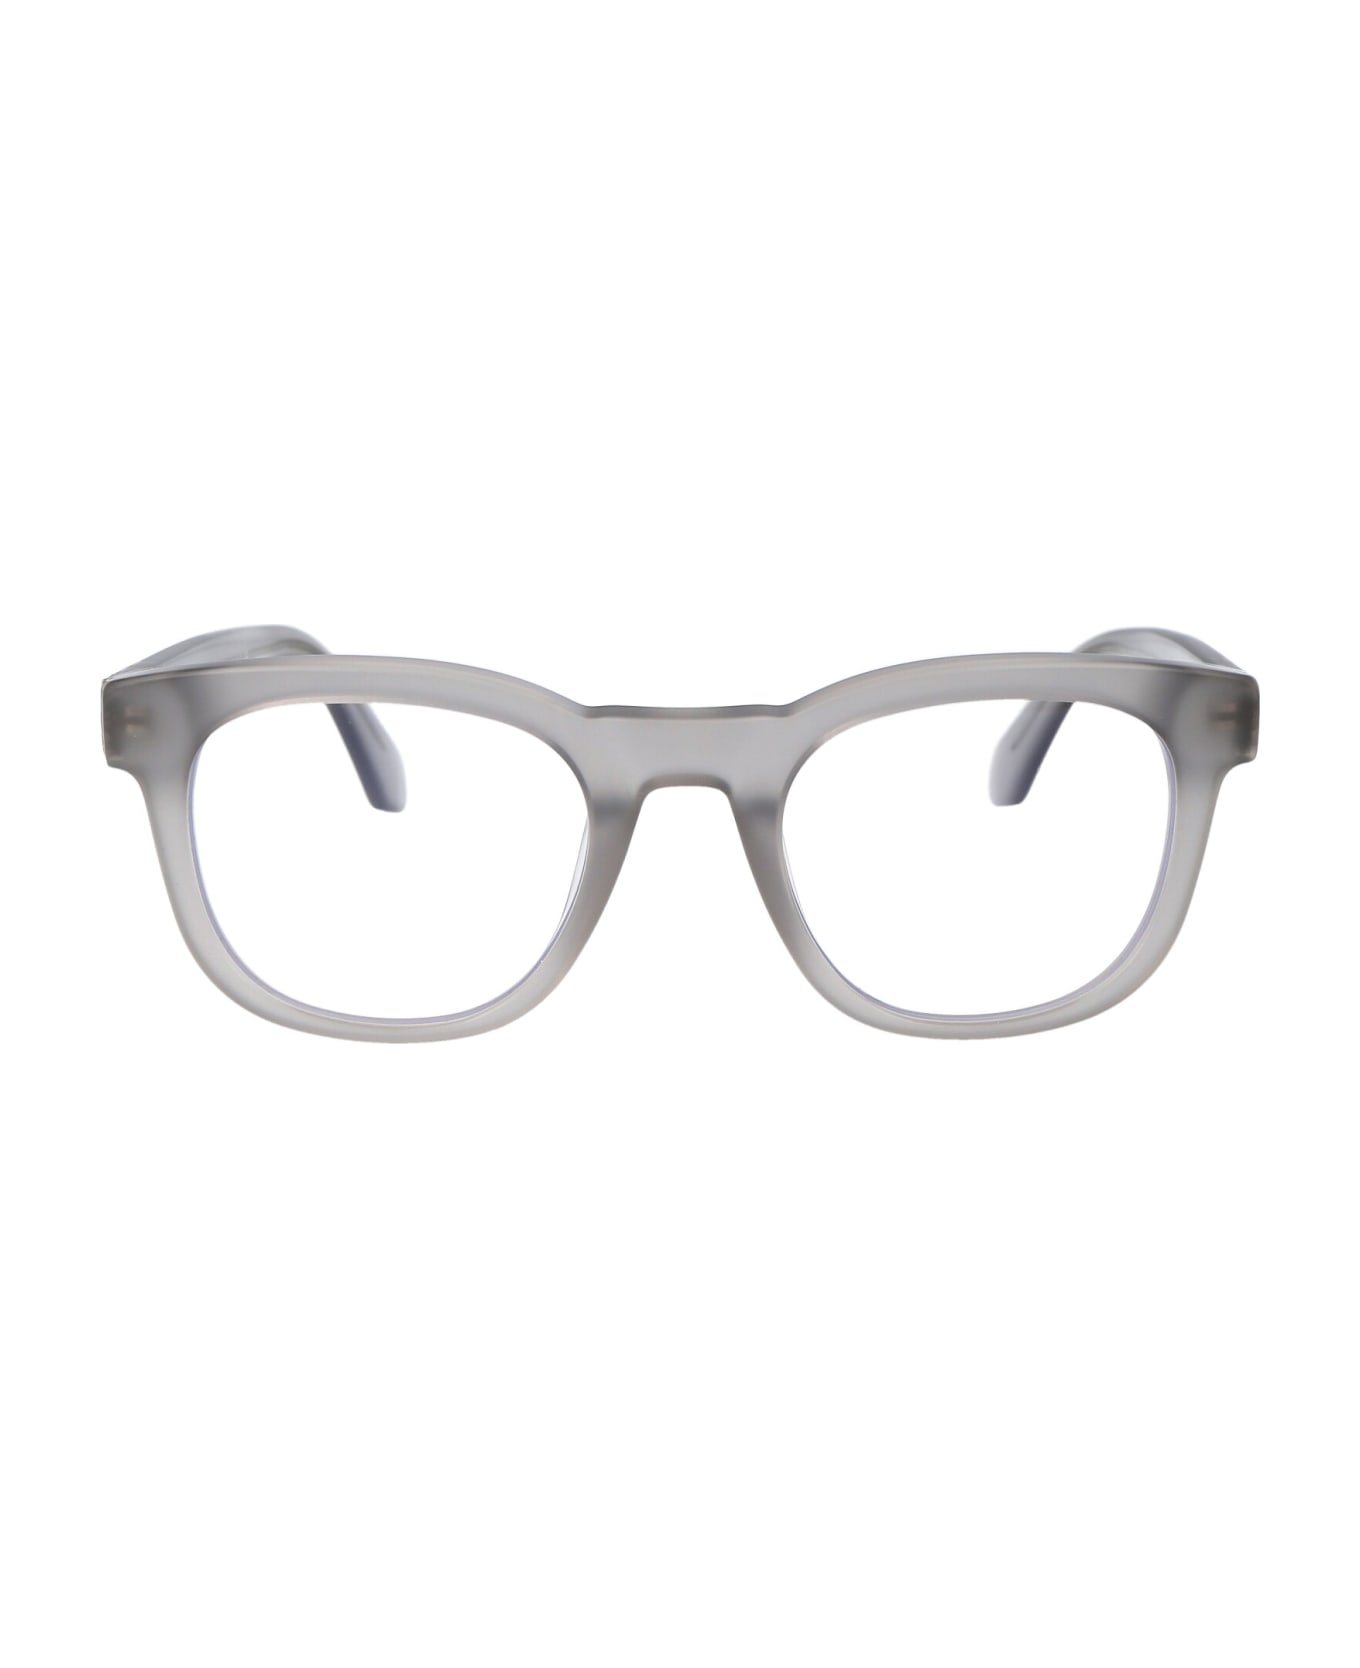 Off-White Optical Style 71 Glasses - 0900 GREY 